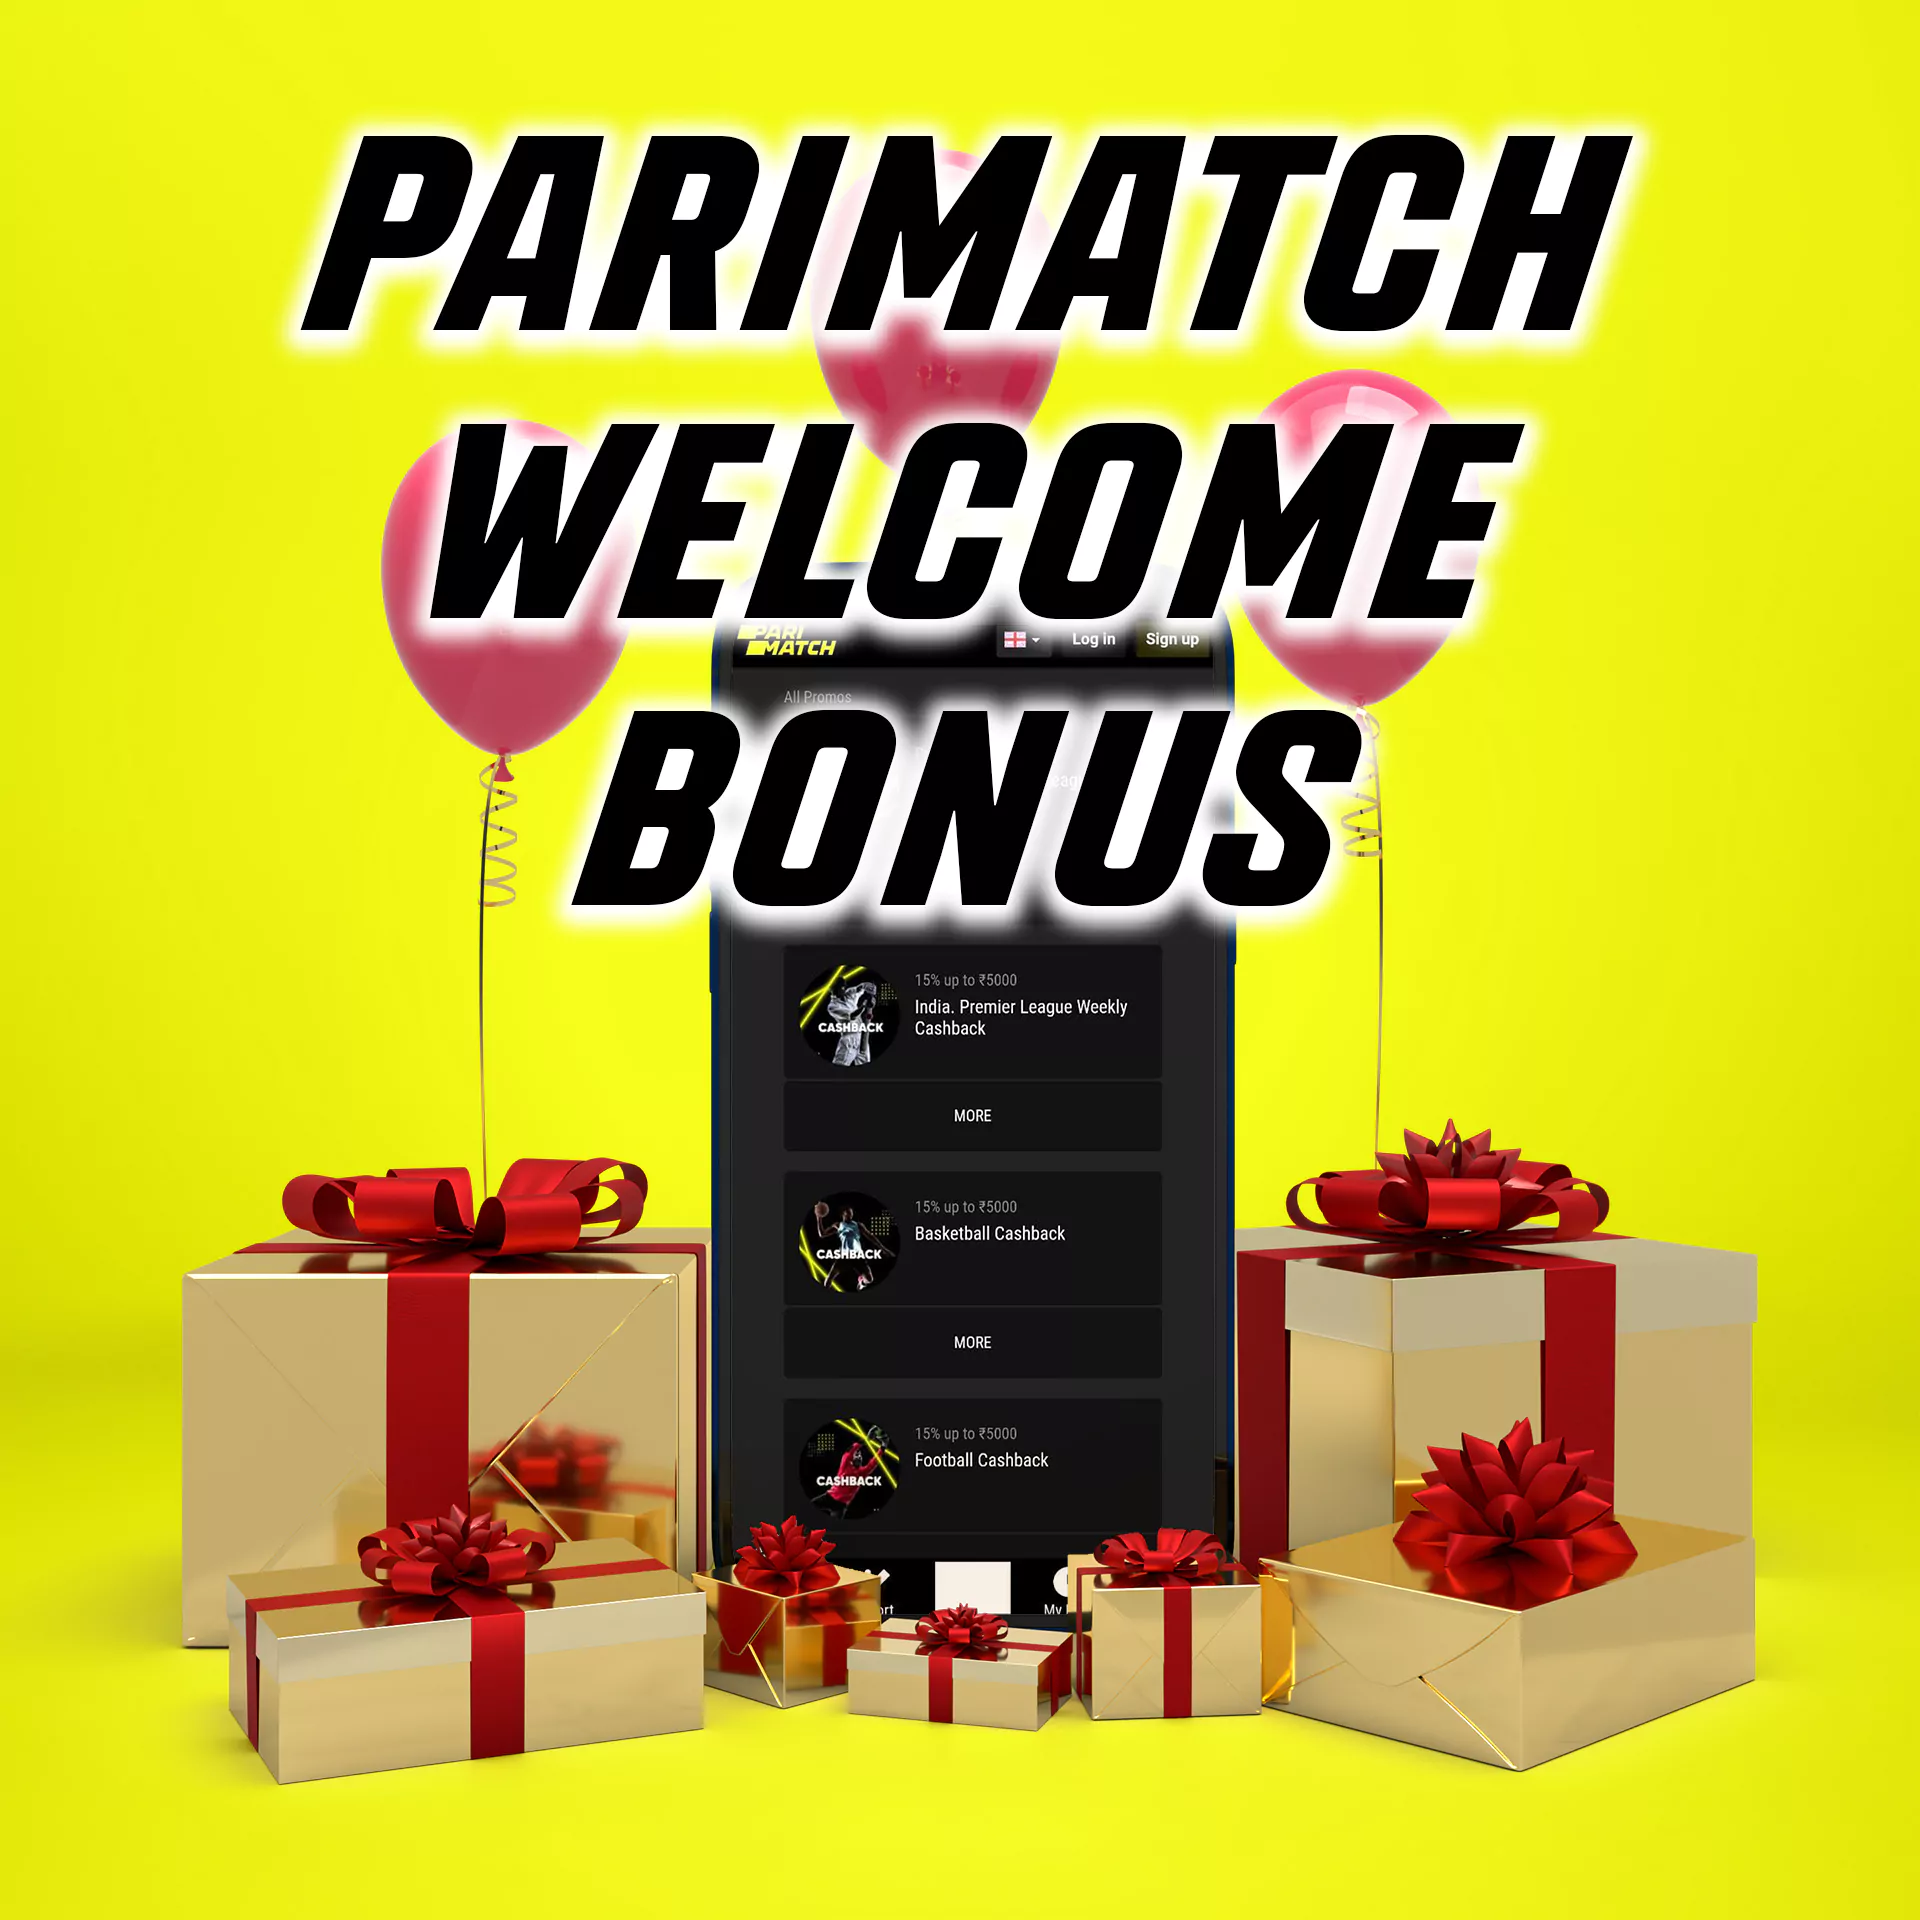 For new users, Parimatch offers through the app welcome bonus and get up to +100% to your first deposit and 15,000 Indian rupees to your gaming account.